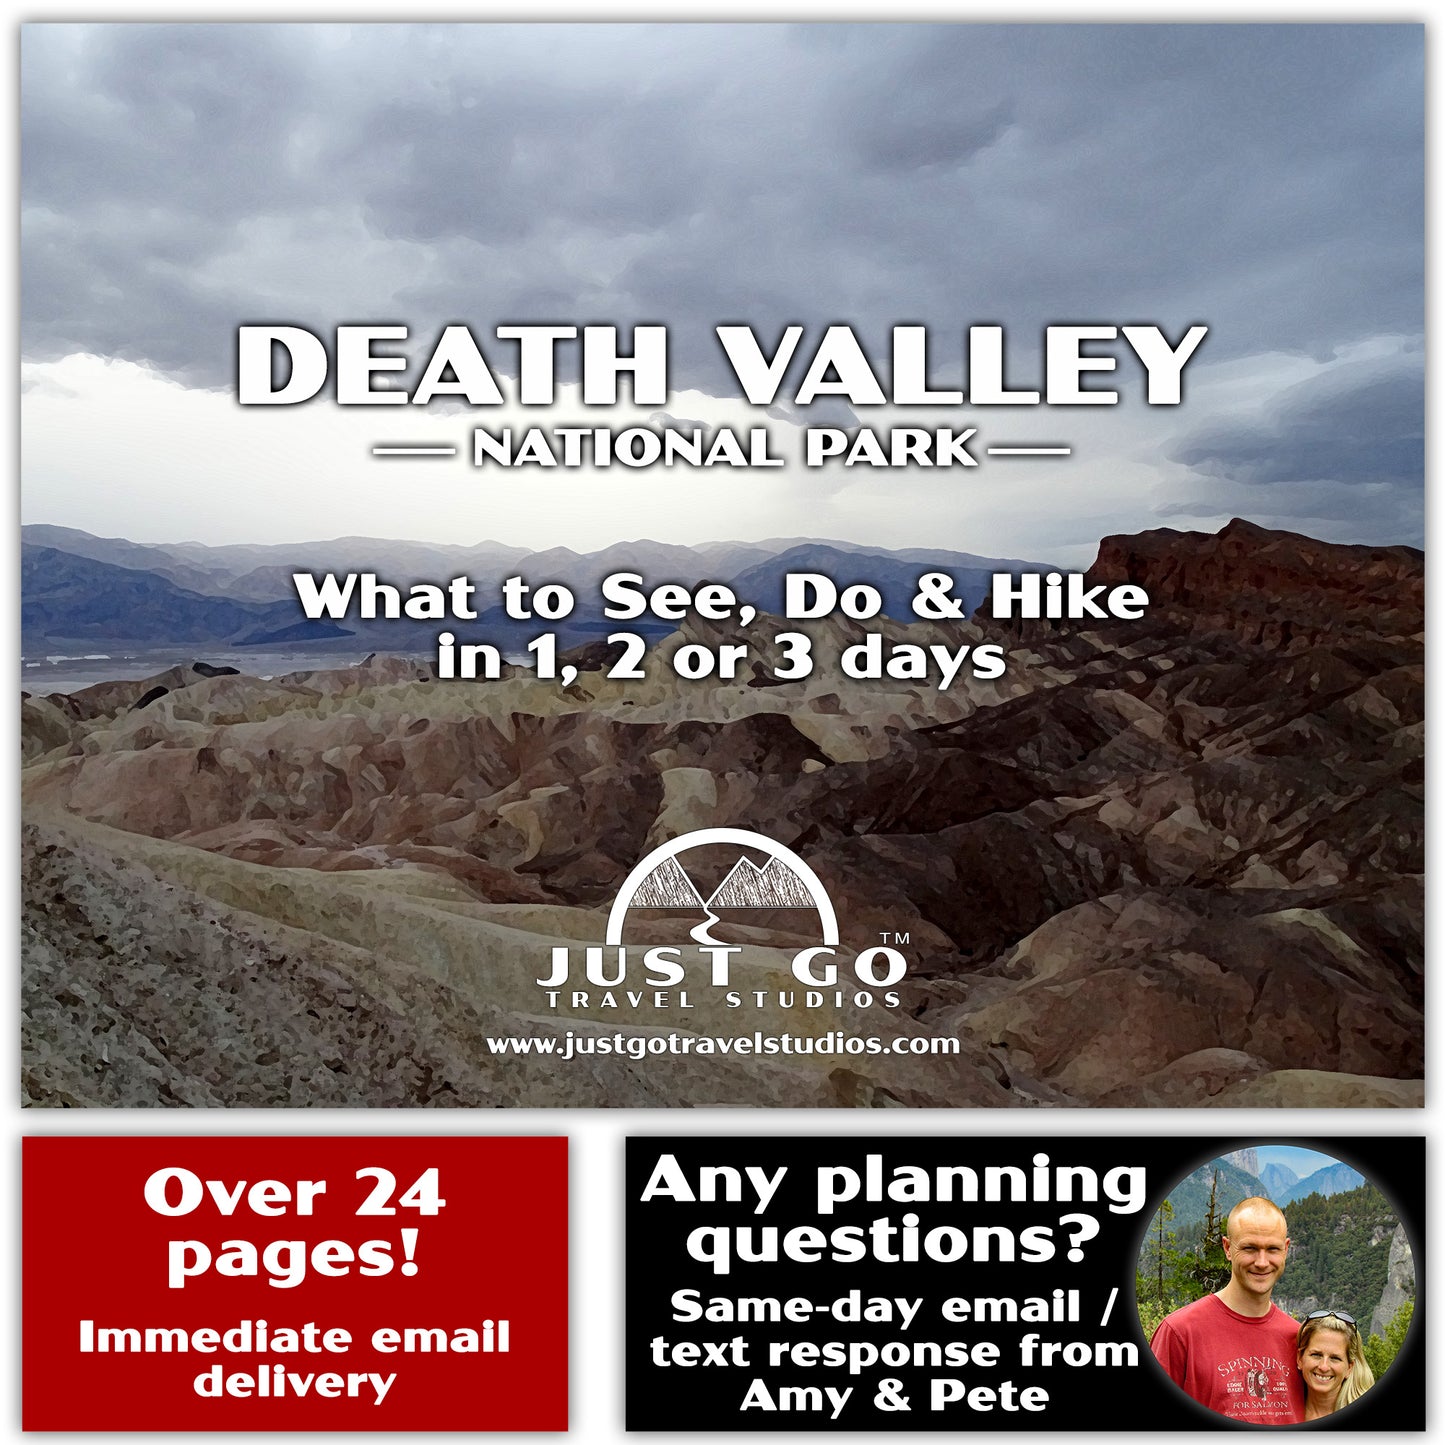 Death Valley National Park Itinerary (Digital Download)